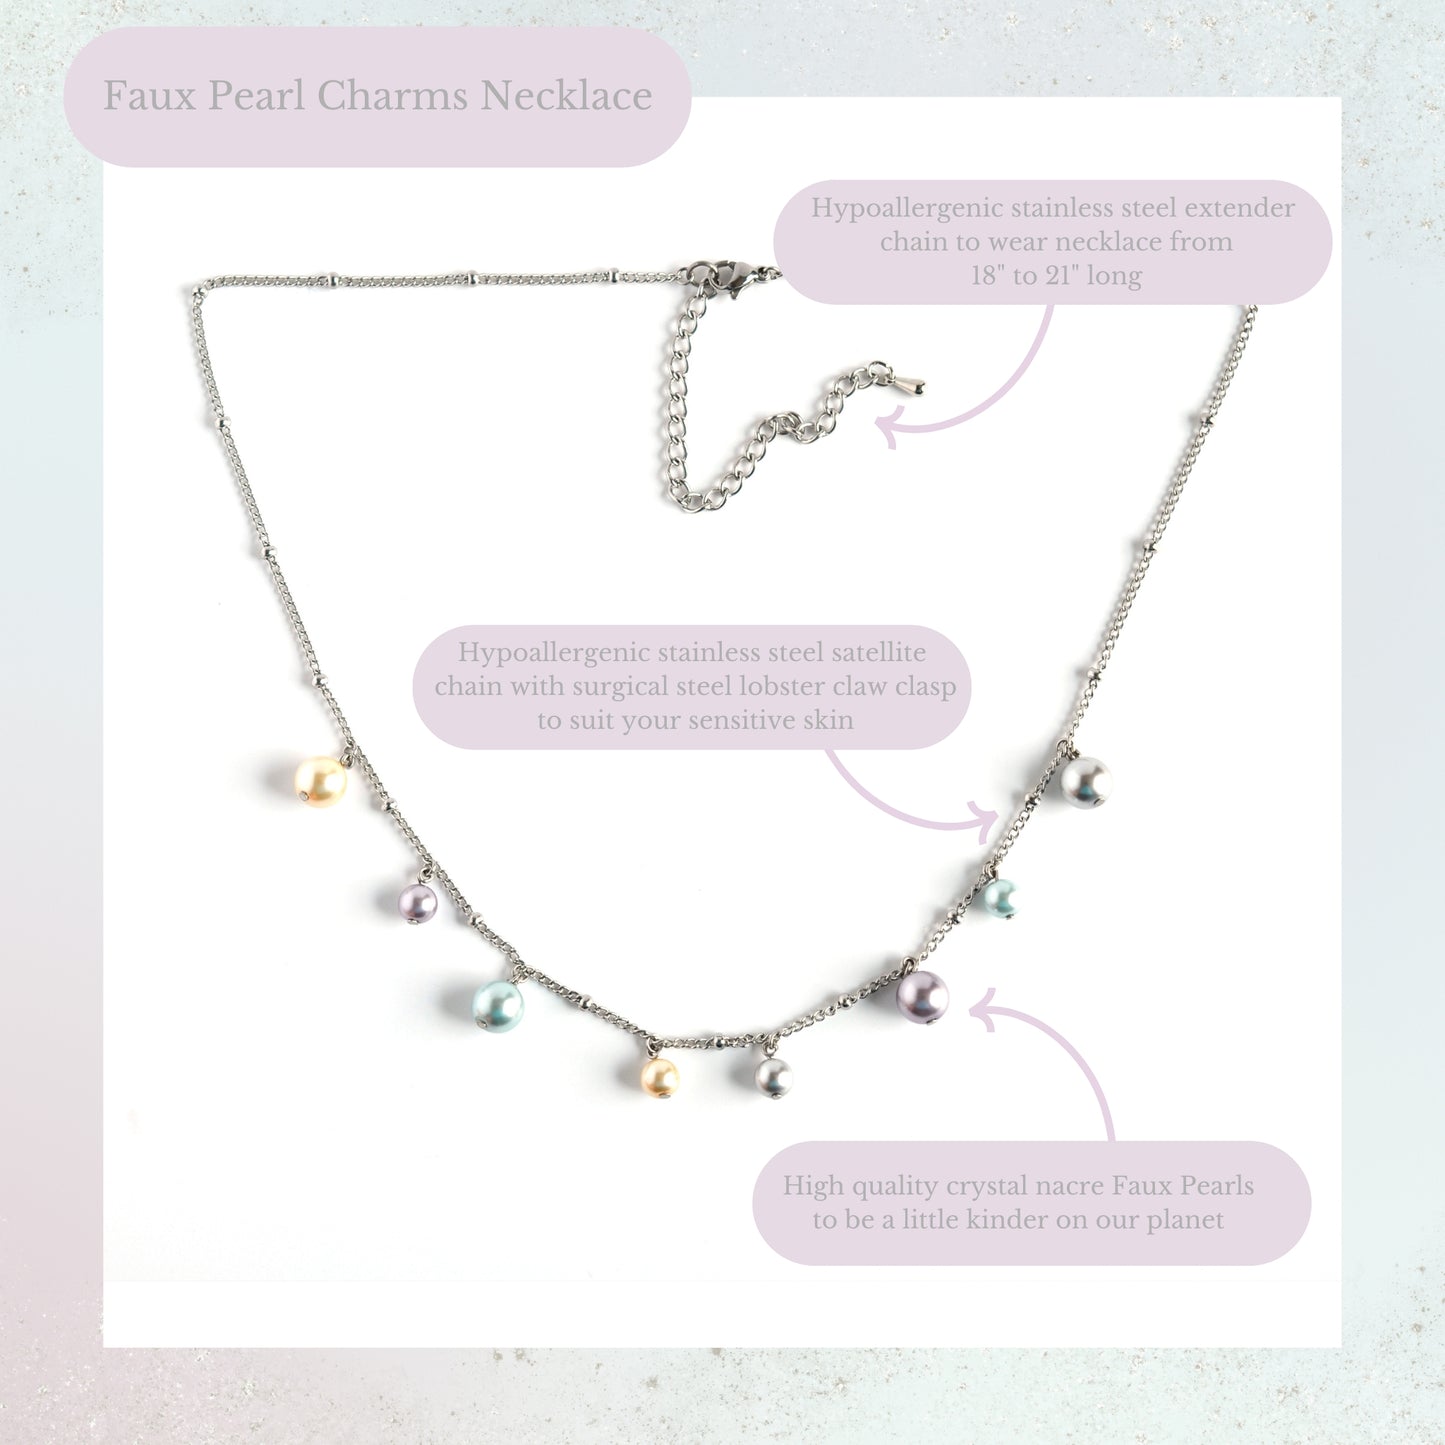 Faux pearl charms necklace product information graphic